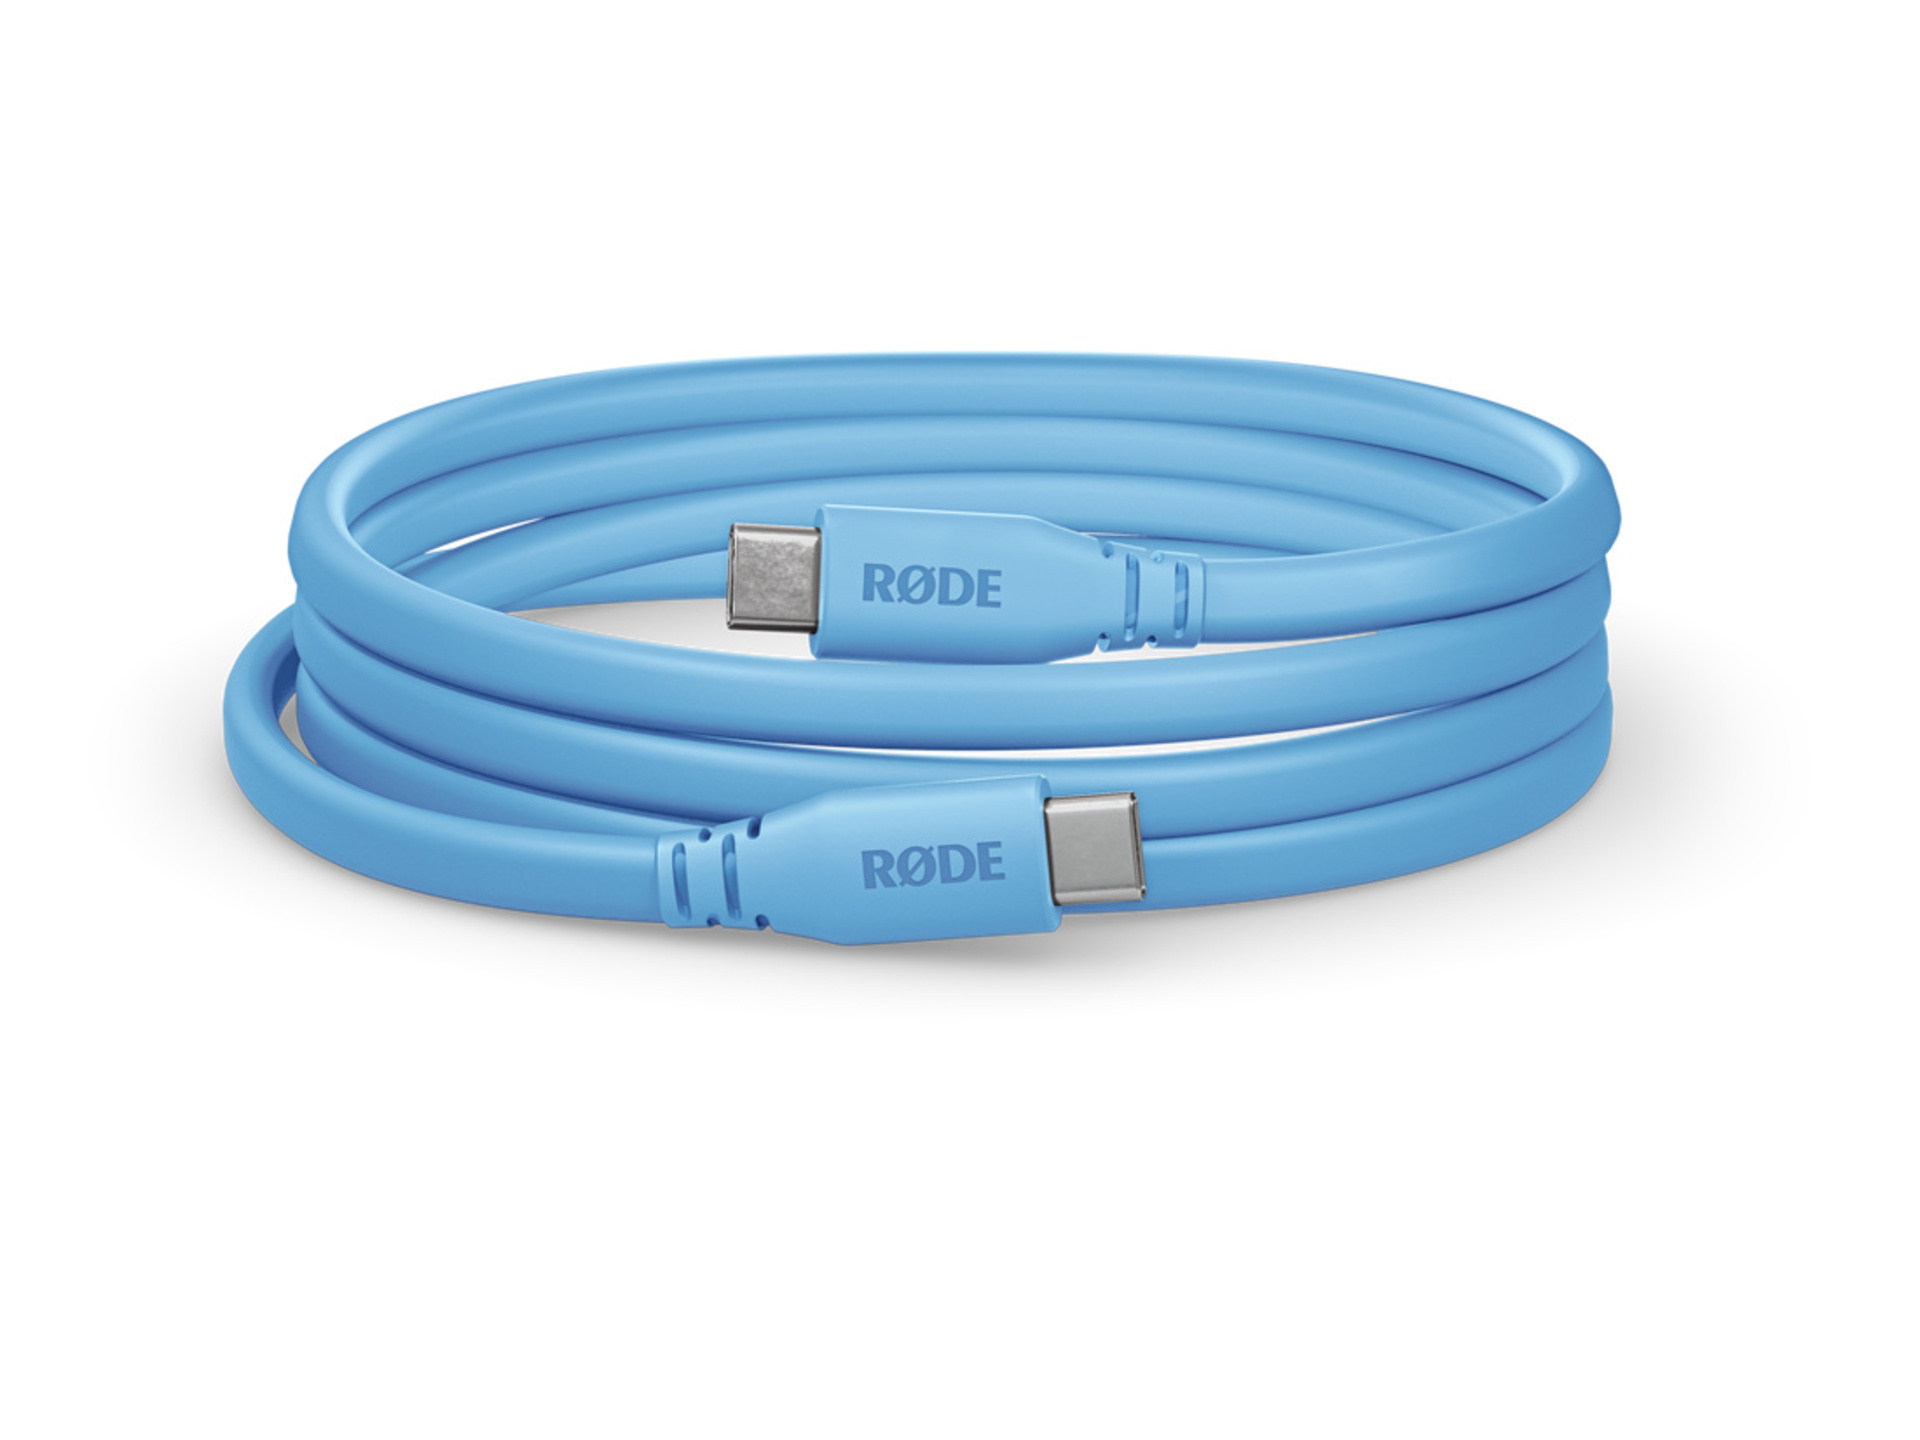 RODE SC17 USB-C to USB-C Cable (1.5m, Blue)